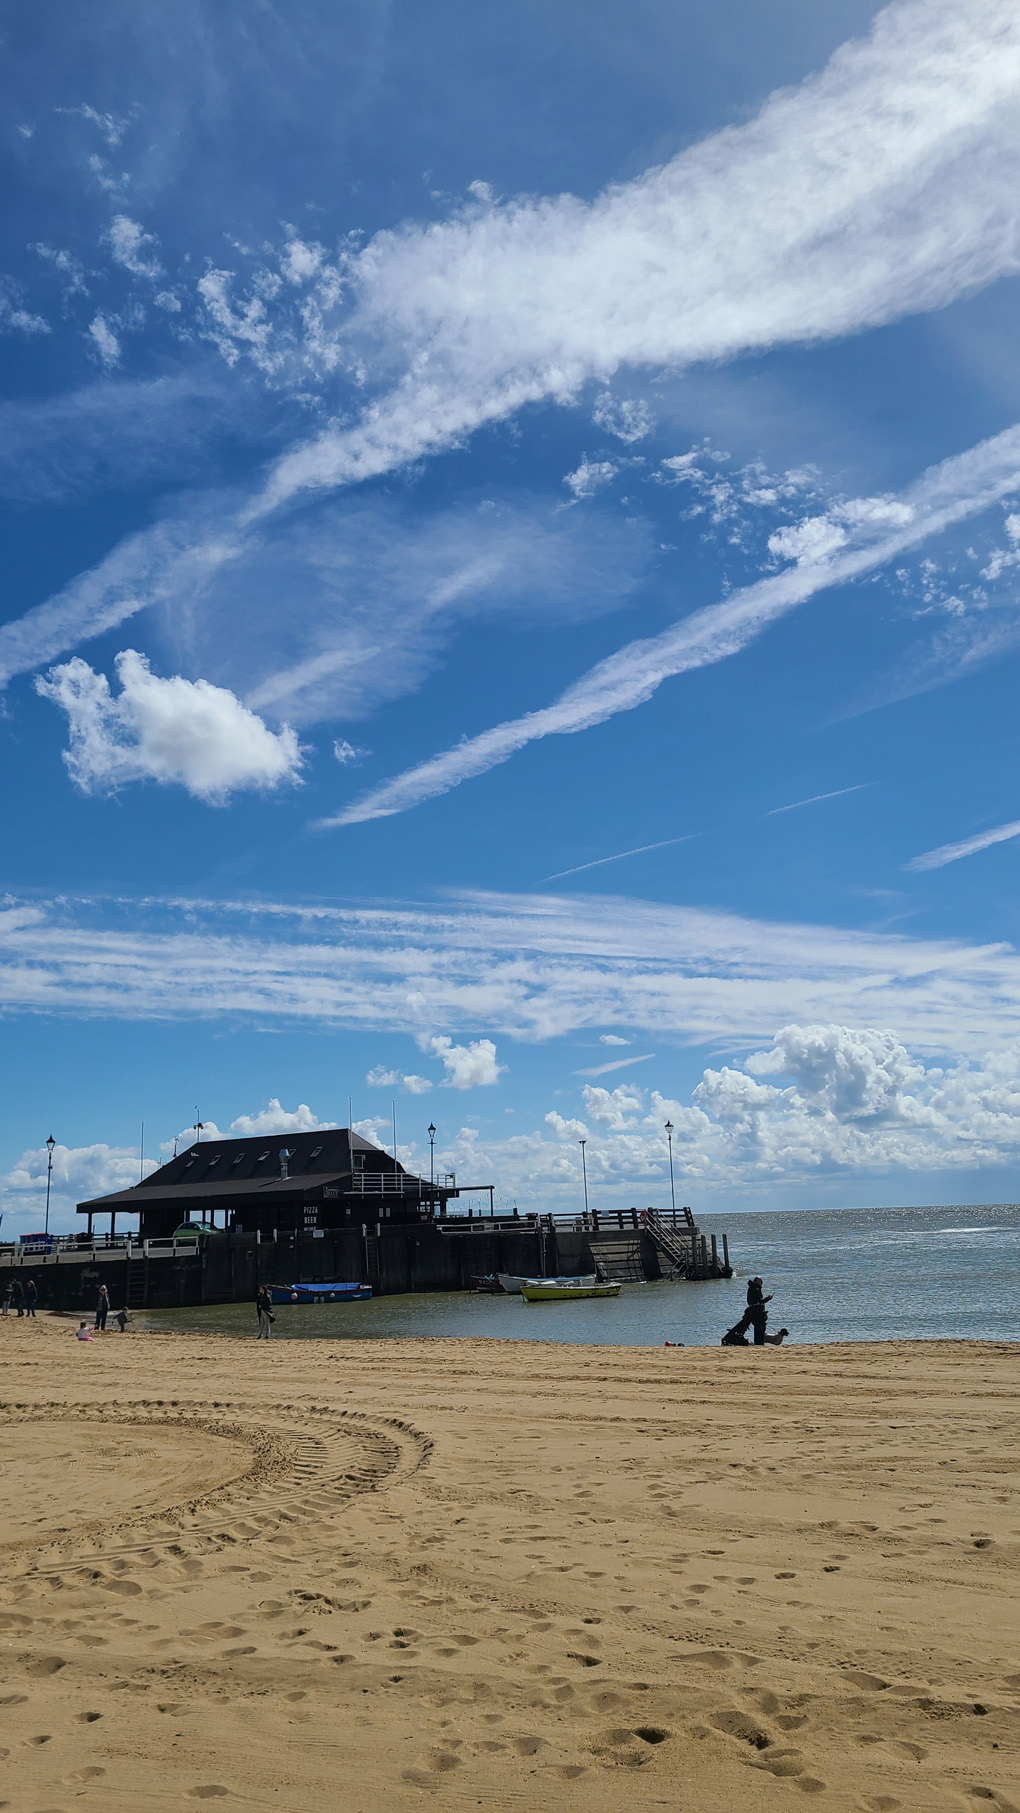 A bright Spring day. Lots of different white clouds against a blue sky, over a the sea and beach. There is a jetty with a large building on it.